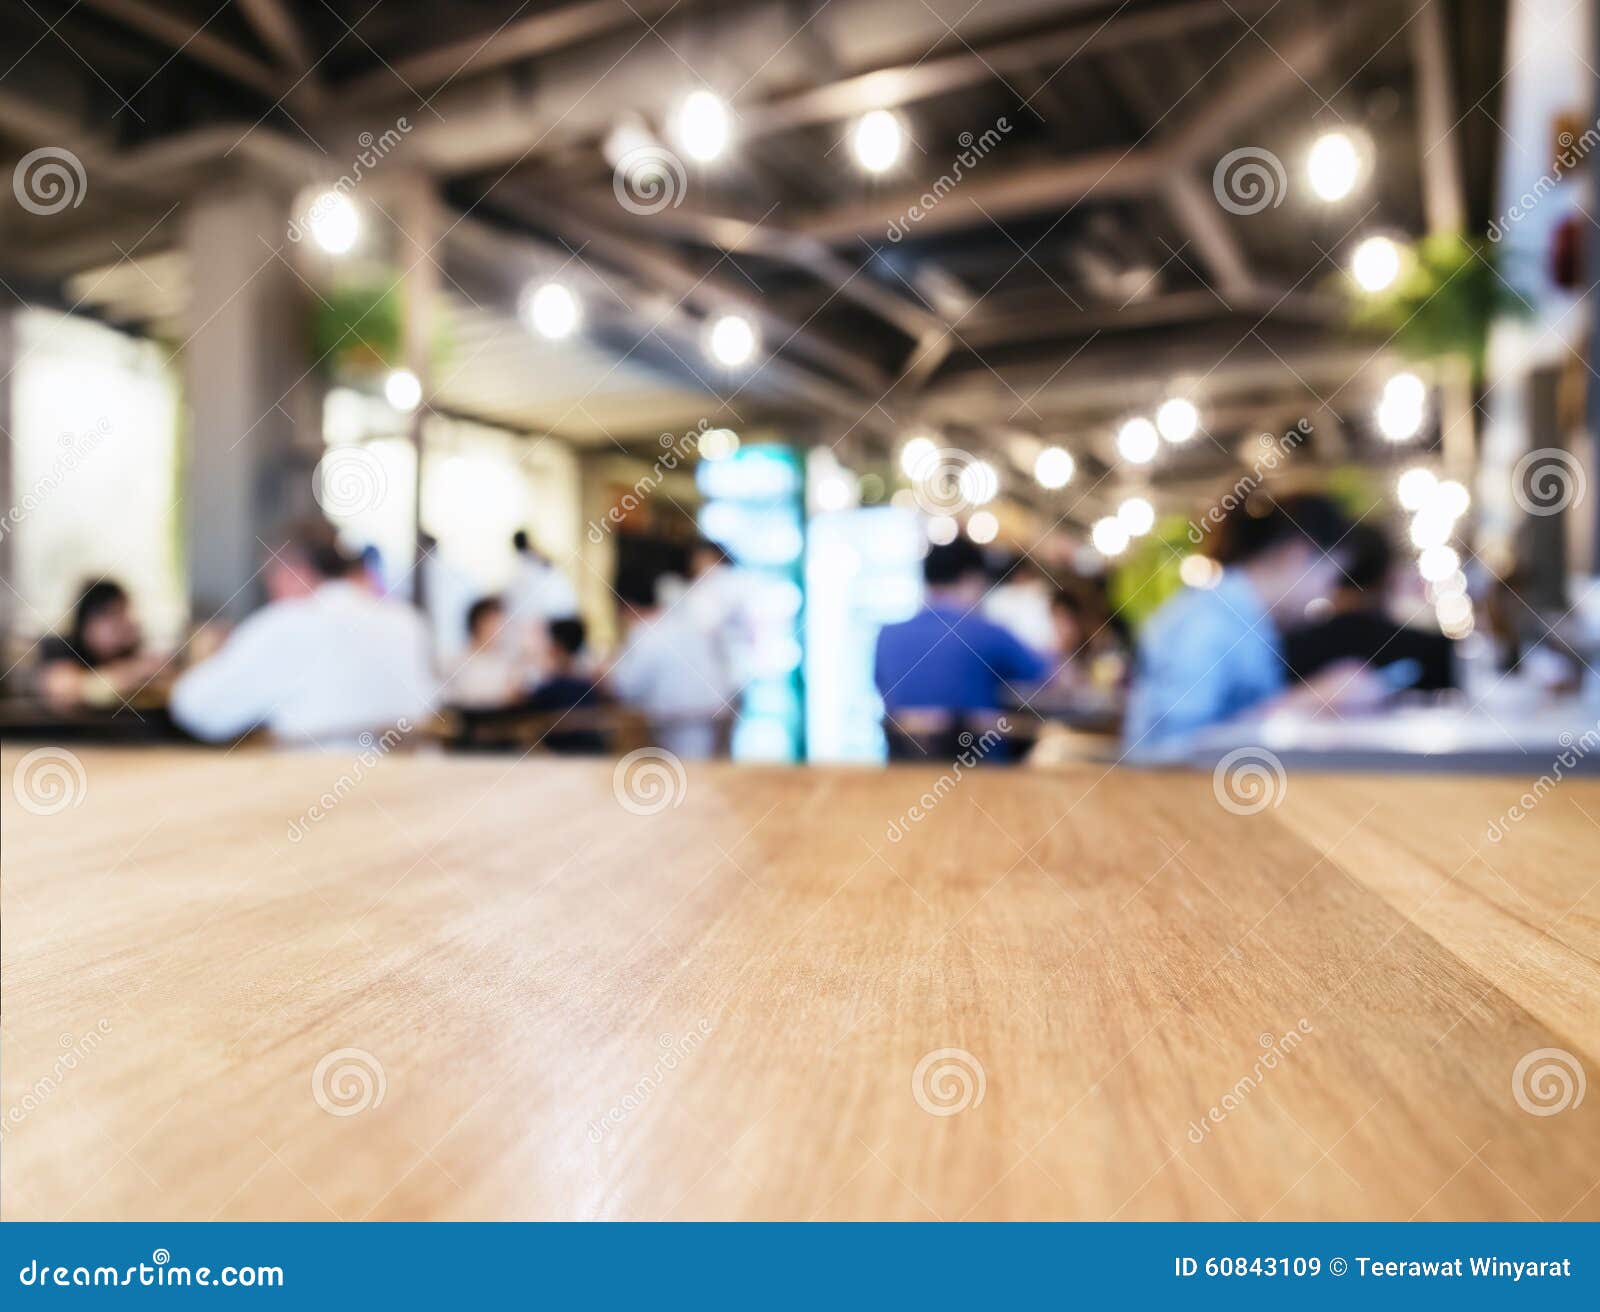 table top counter in coffee shop cafe blurred people background